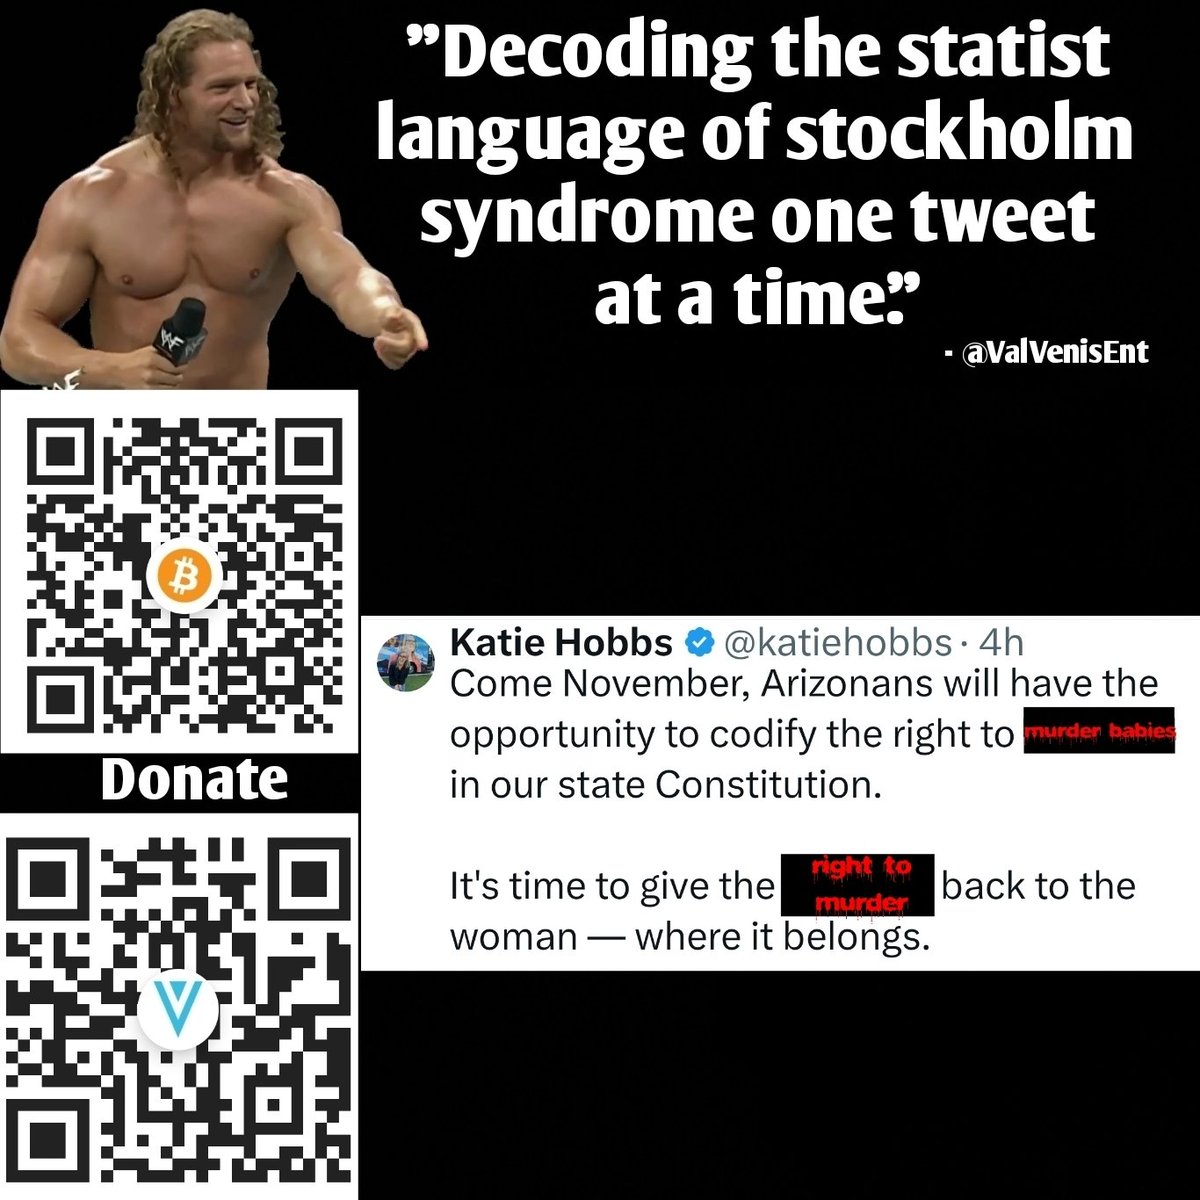 Hey @katiehobbs! I fixed your murderous, blood thirsty, statist infected tweet for rational all-American accuracy. Feel free to buy me a coffee with Bitcoin or Verge Currency for my time. You're welcome.